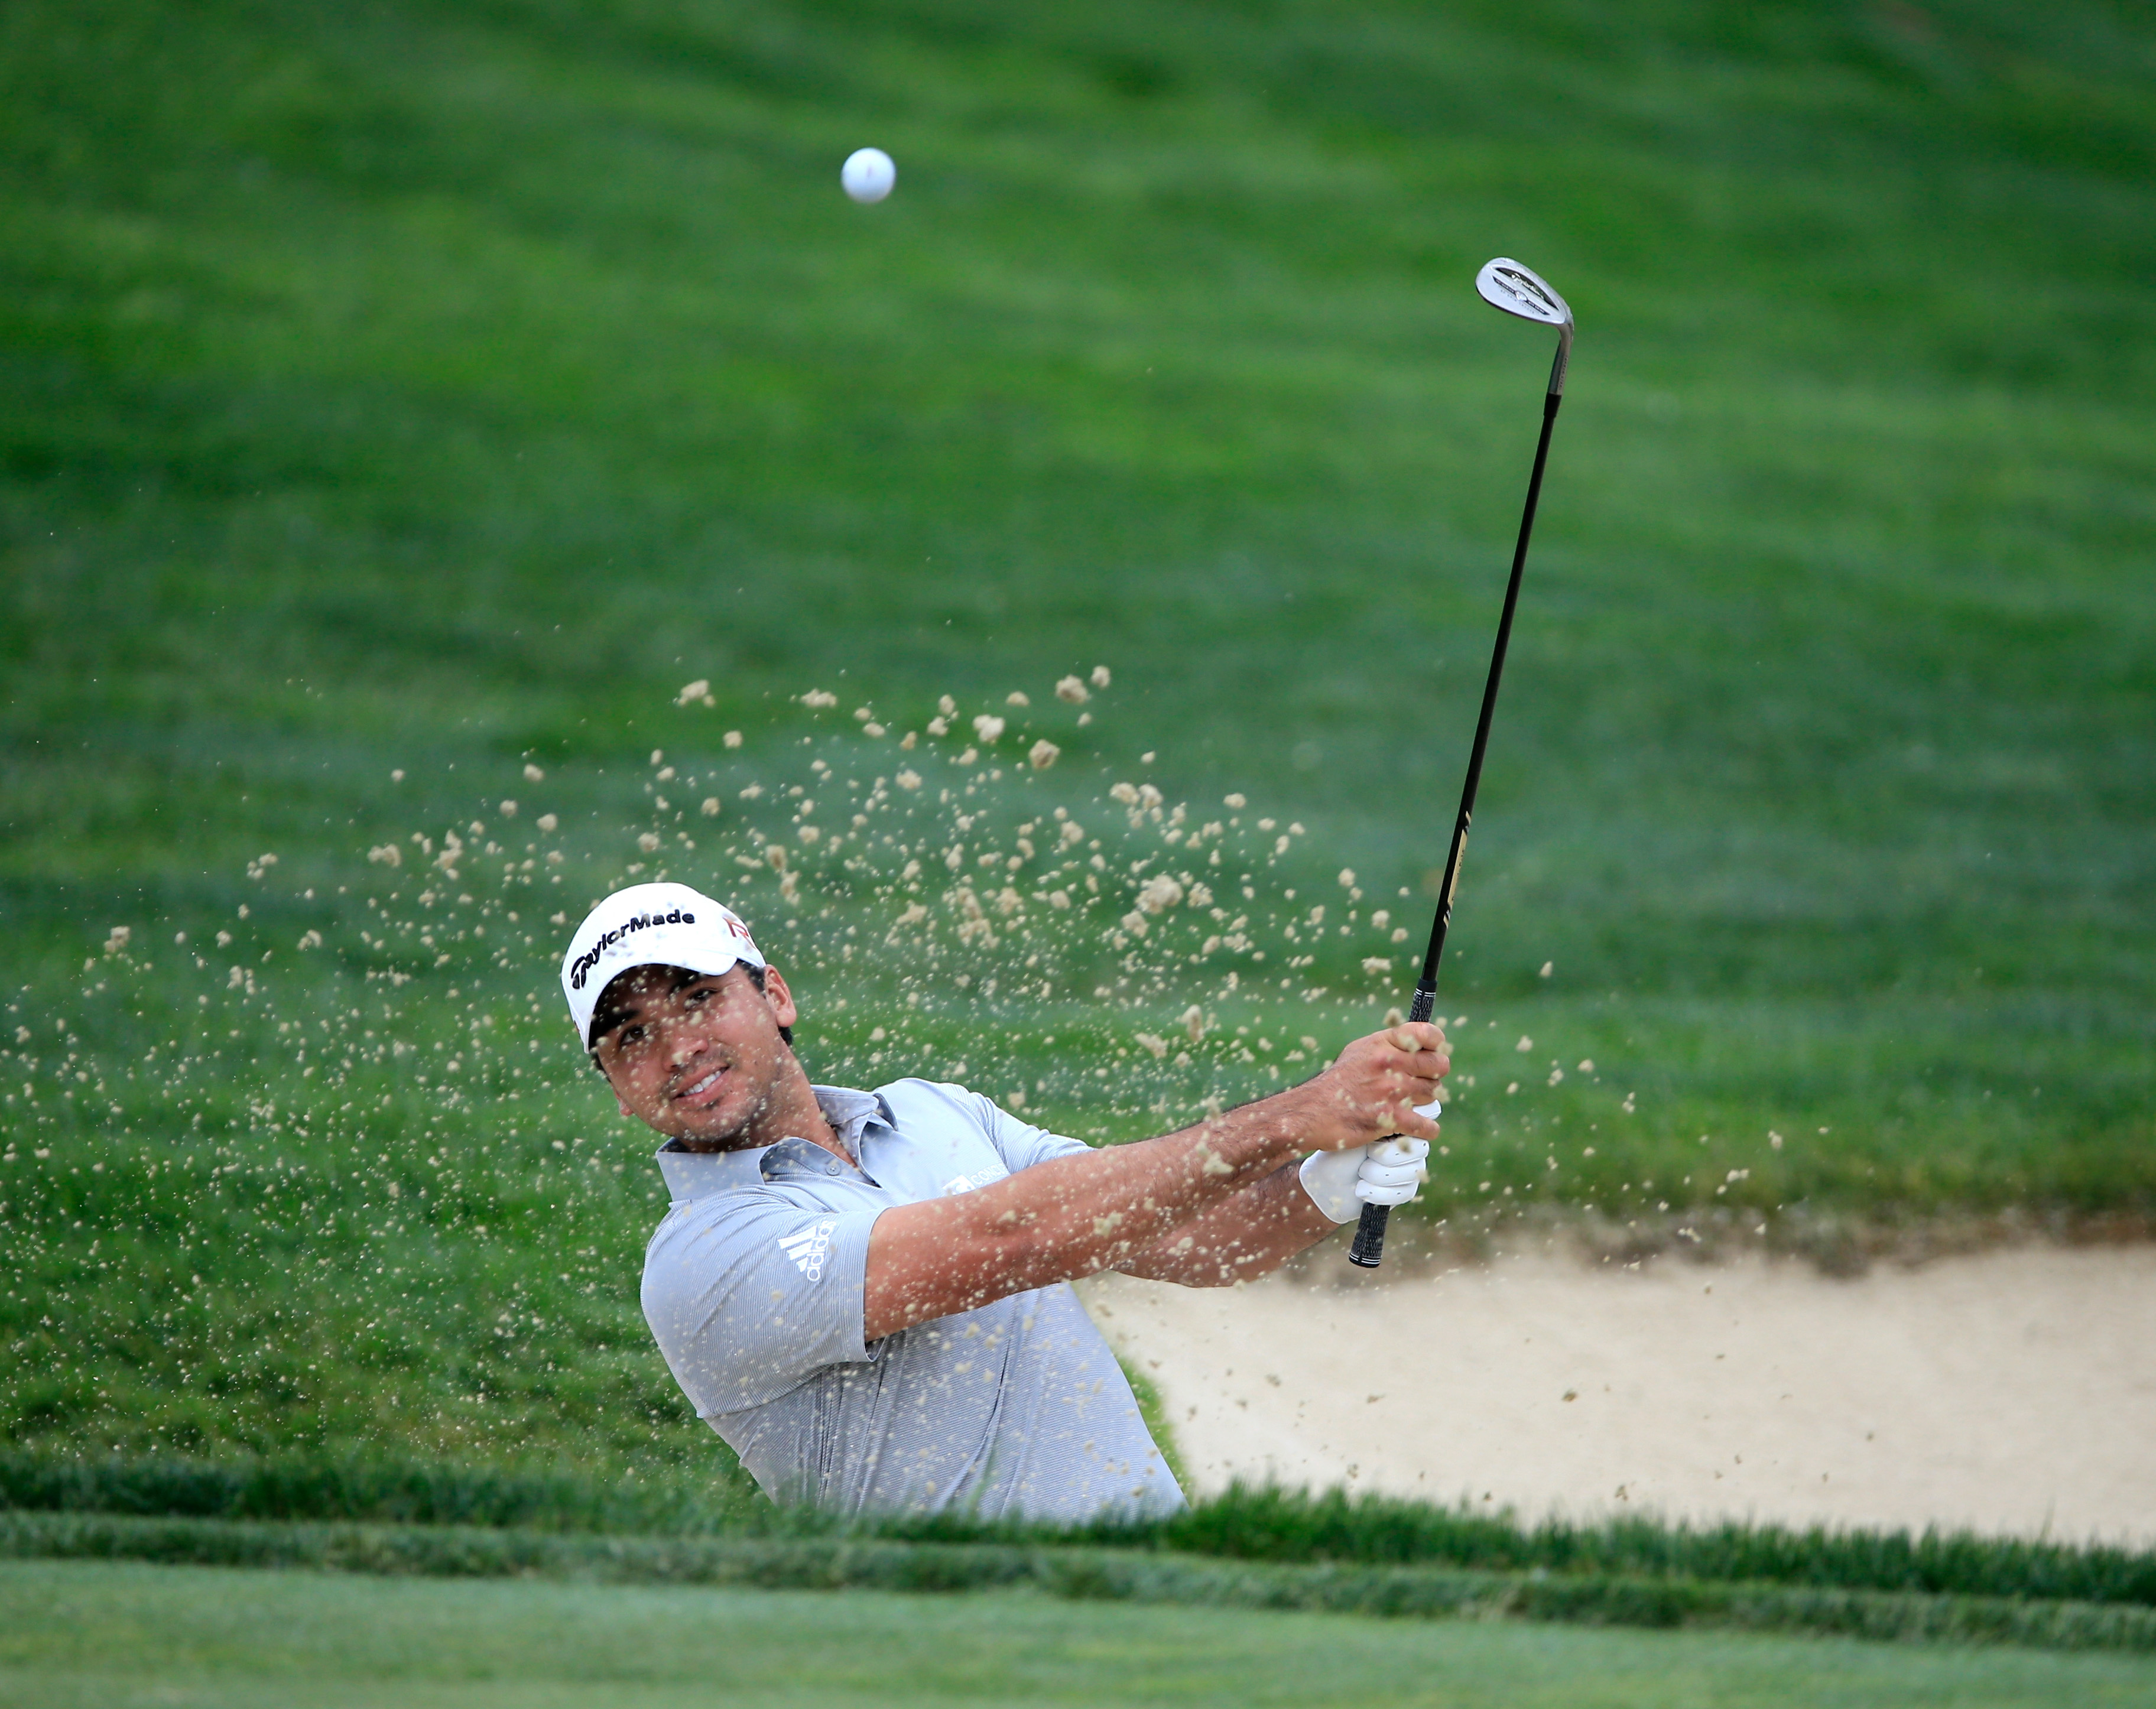 One of these 11 players will win the 2015 U.S. Open | For The Win